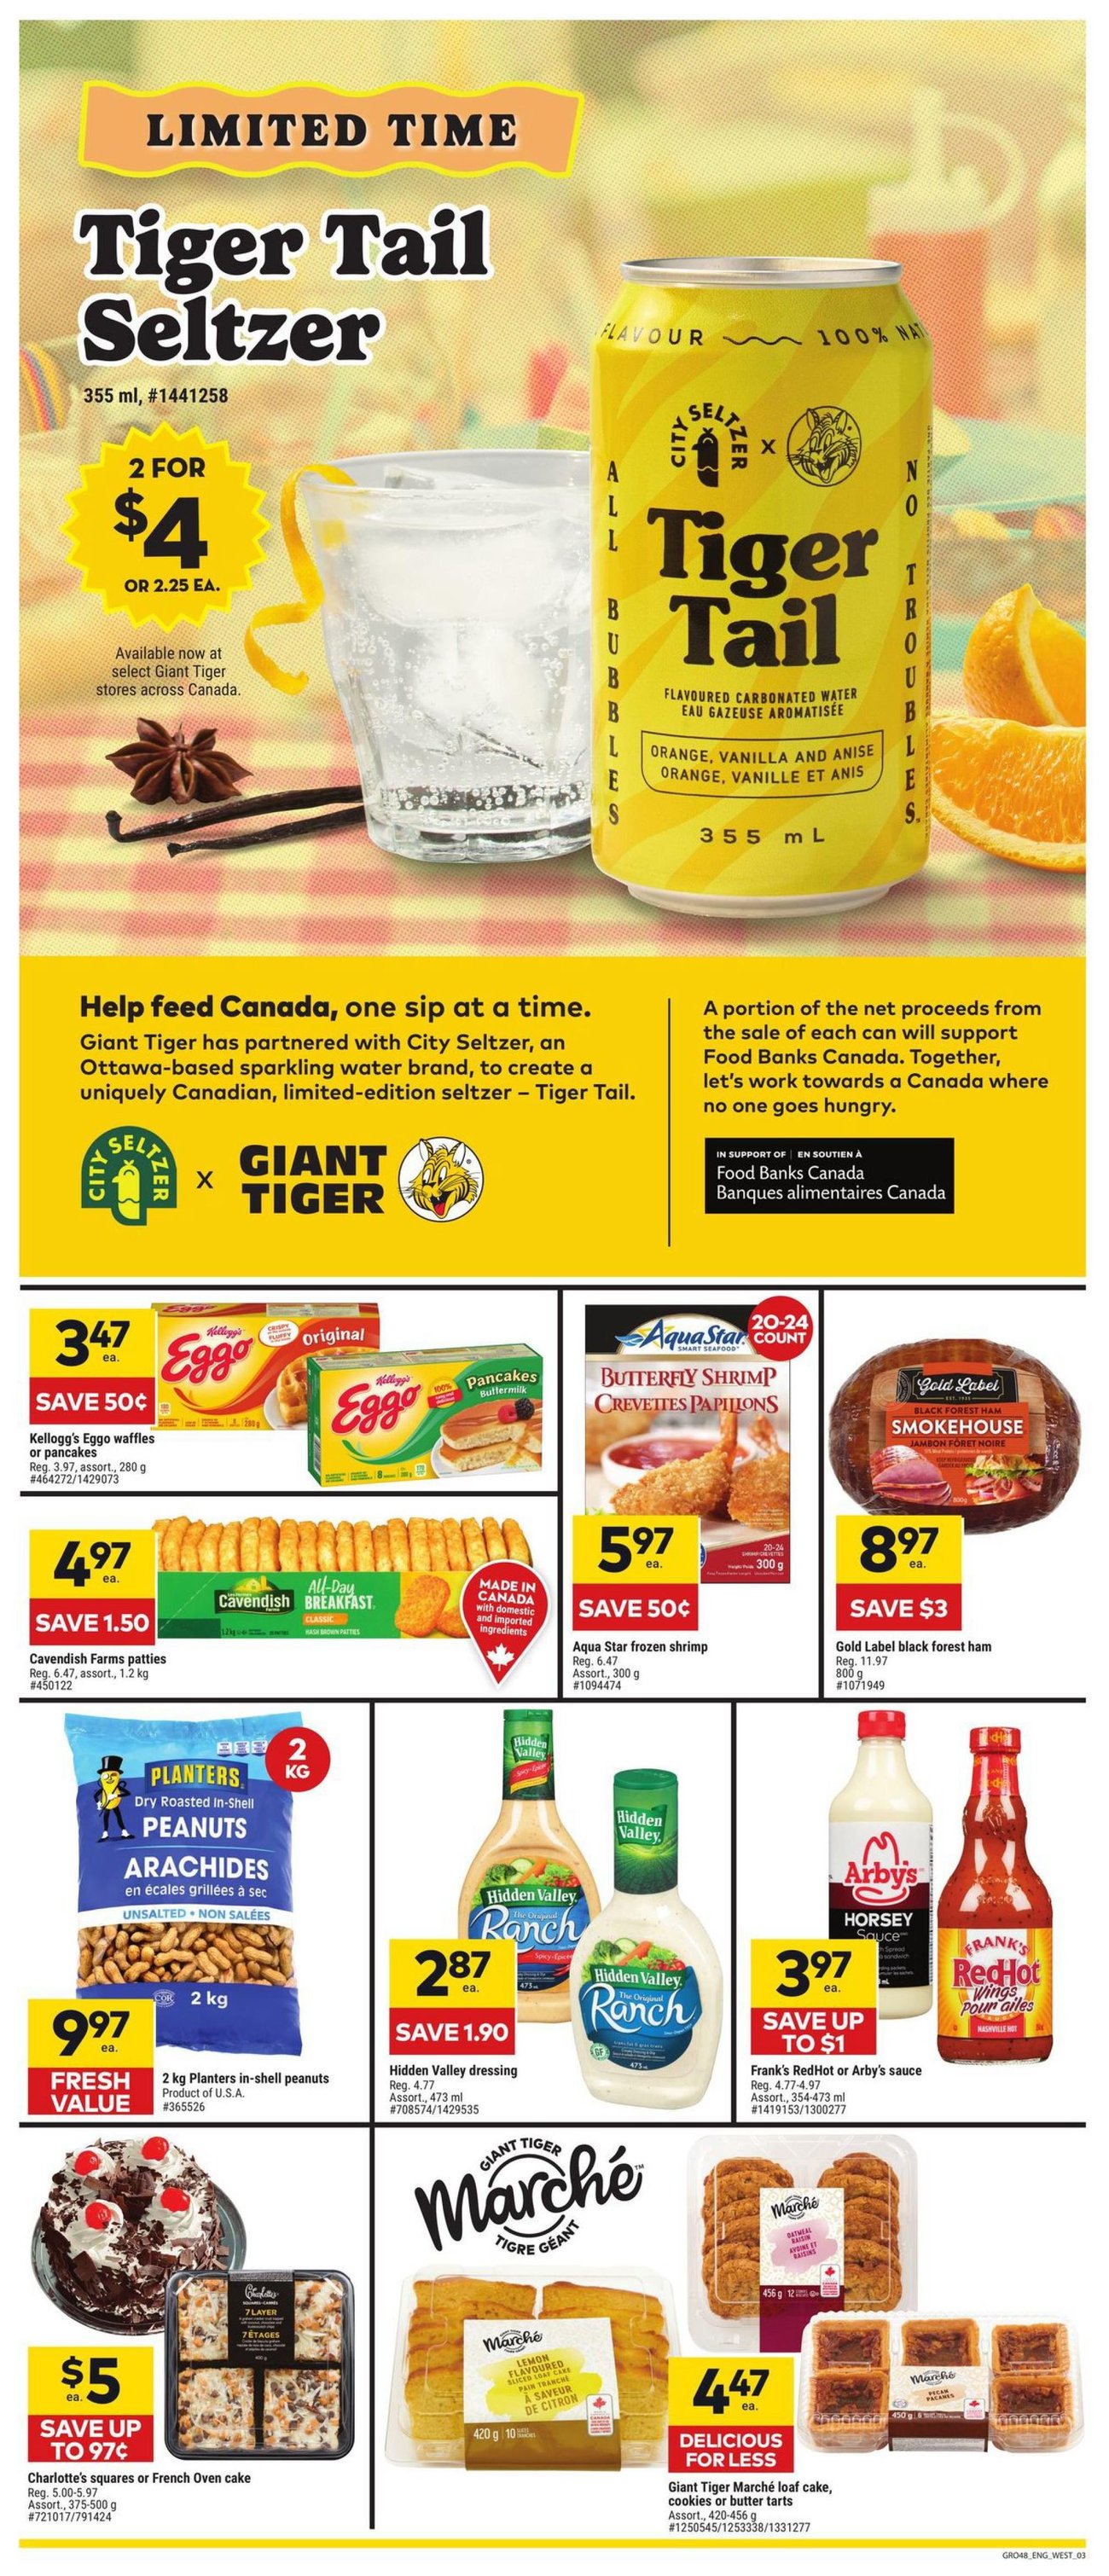 Giant Tiger - Western Canada - Weekly Flyer Specials - Page 4